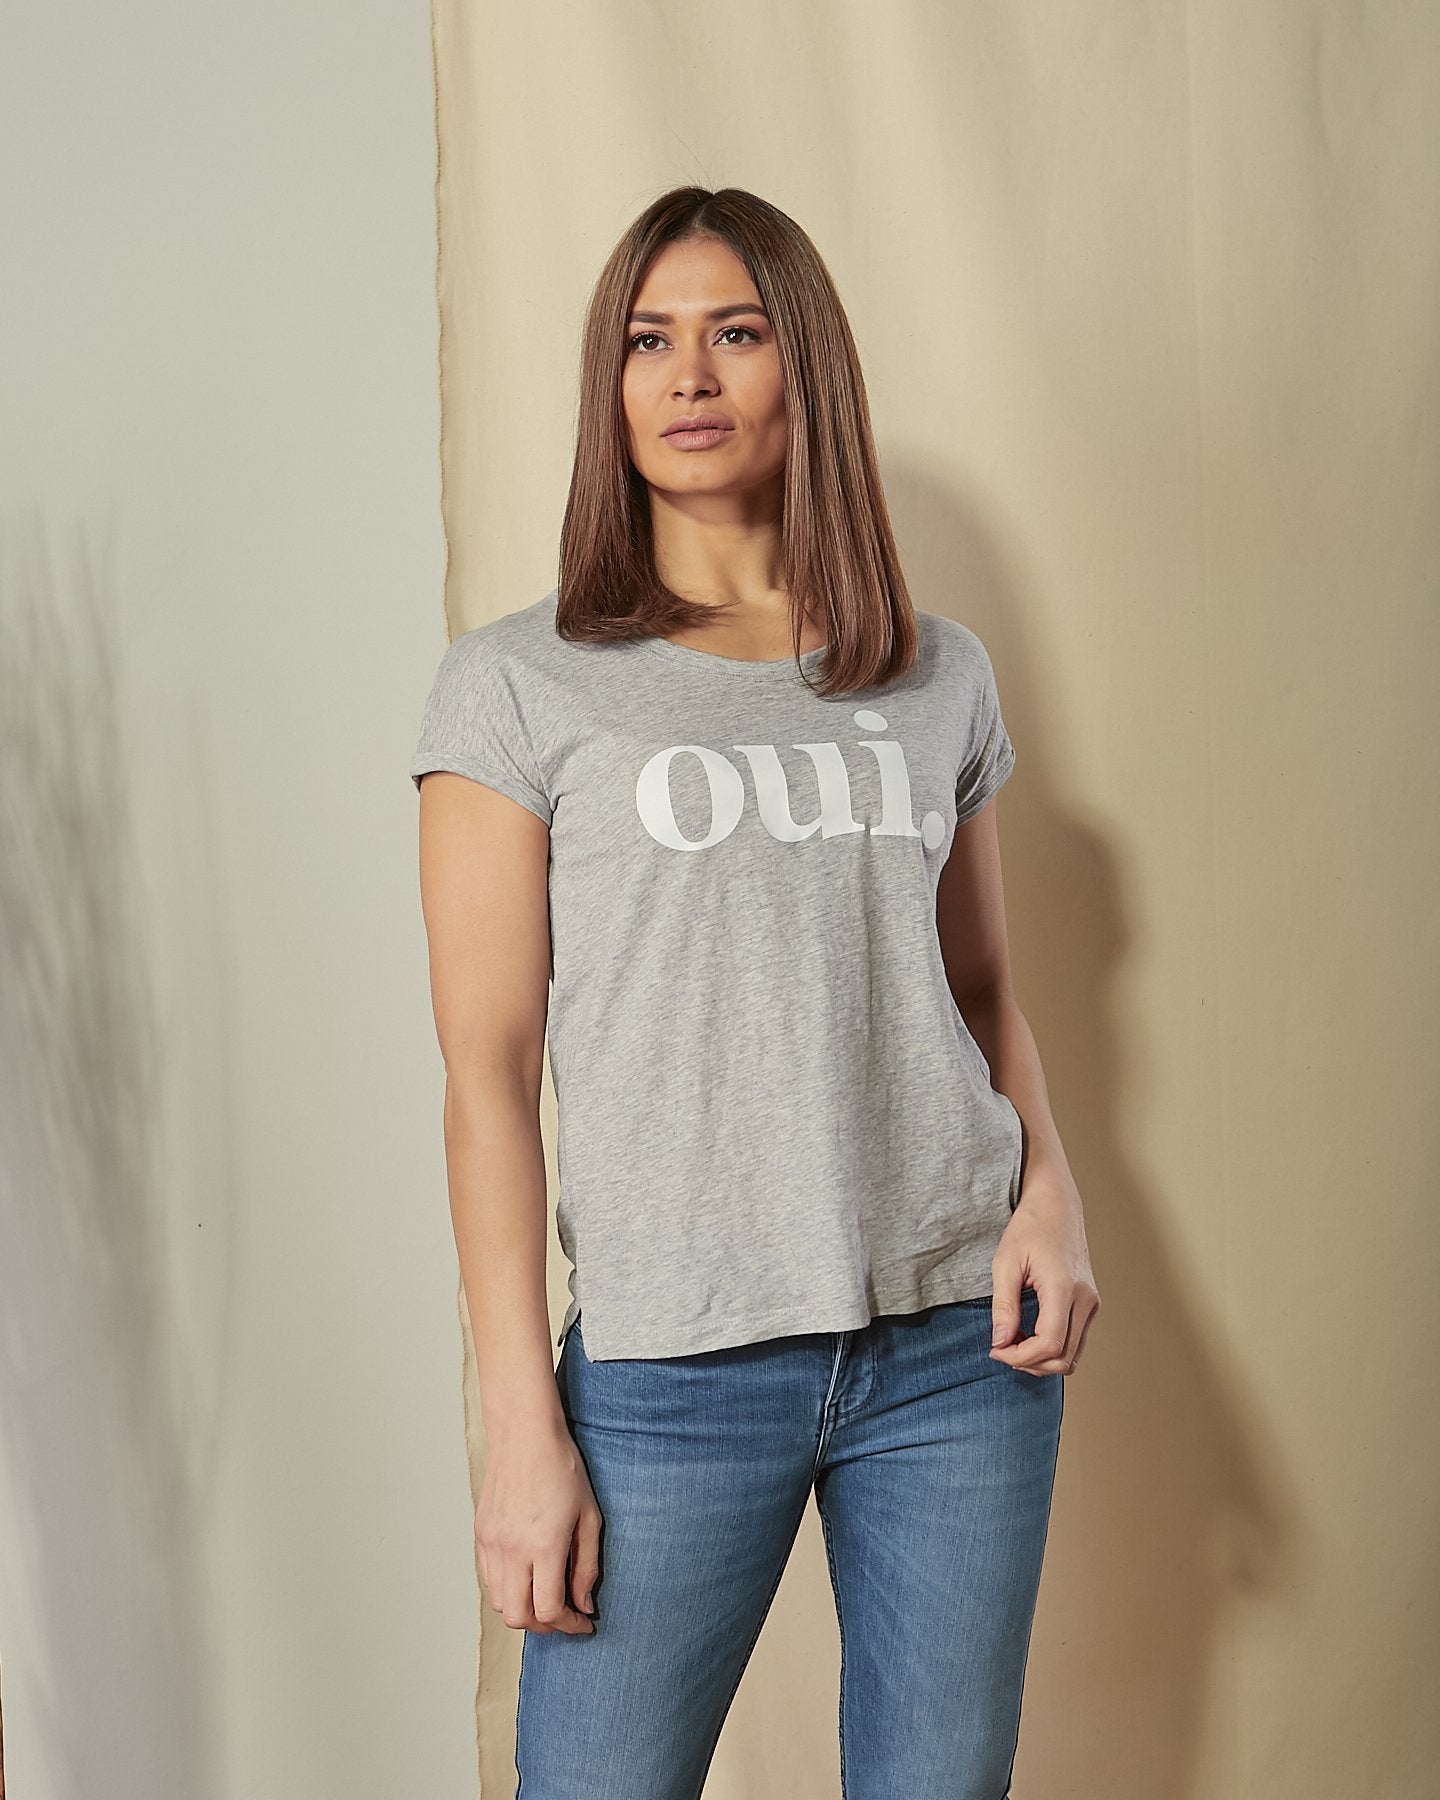 Two-thirds length front view of model wearing 'Oui' motif t-shirt in grey.